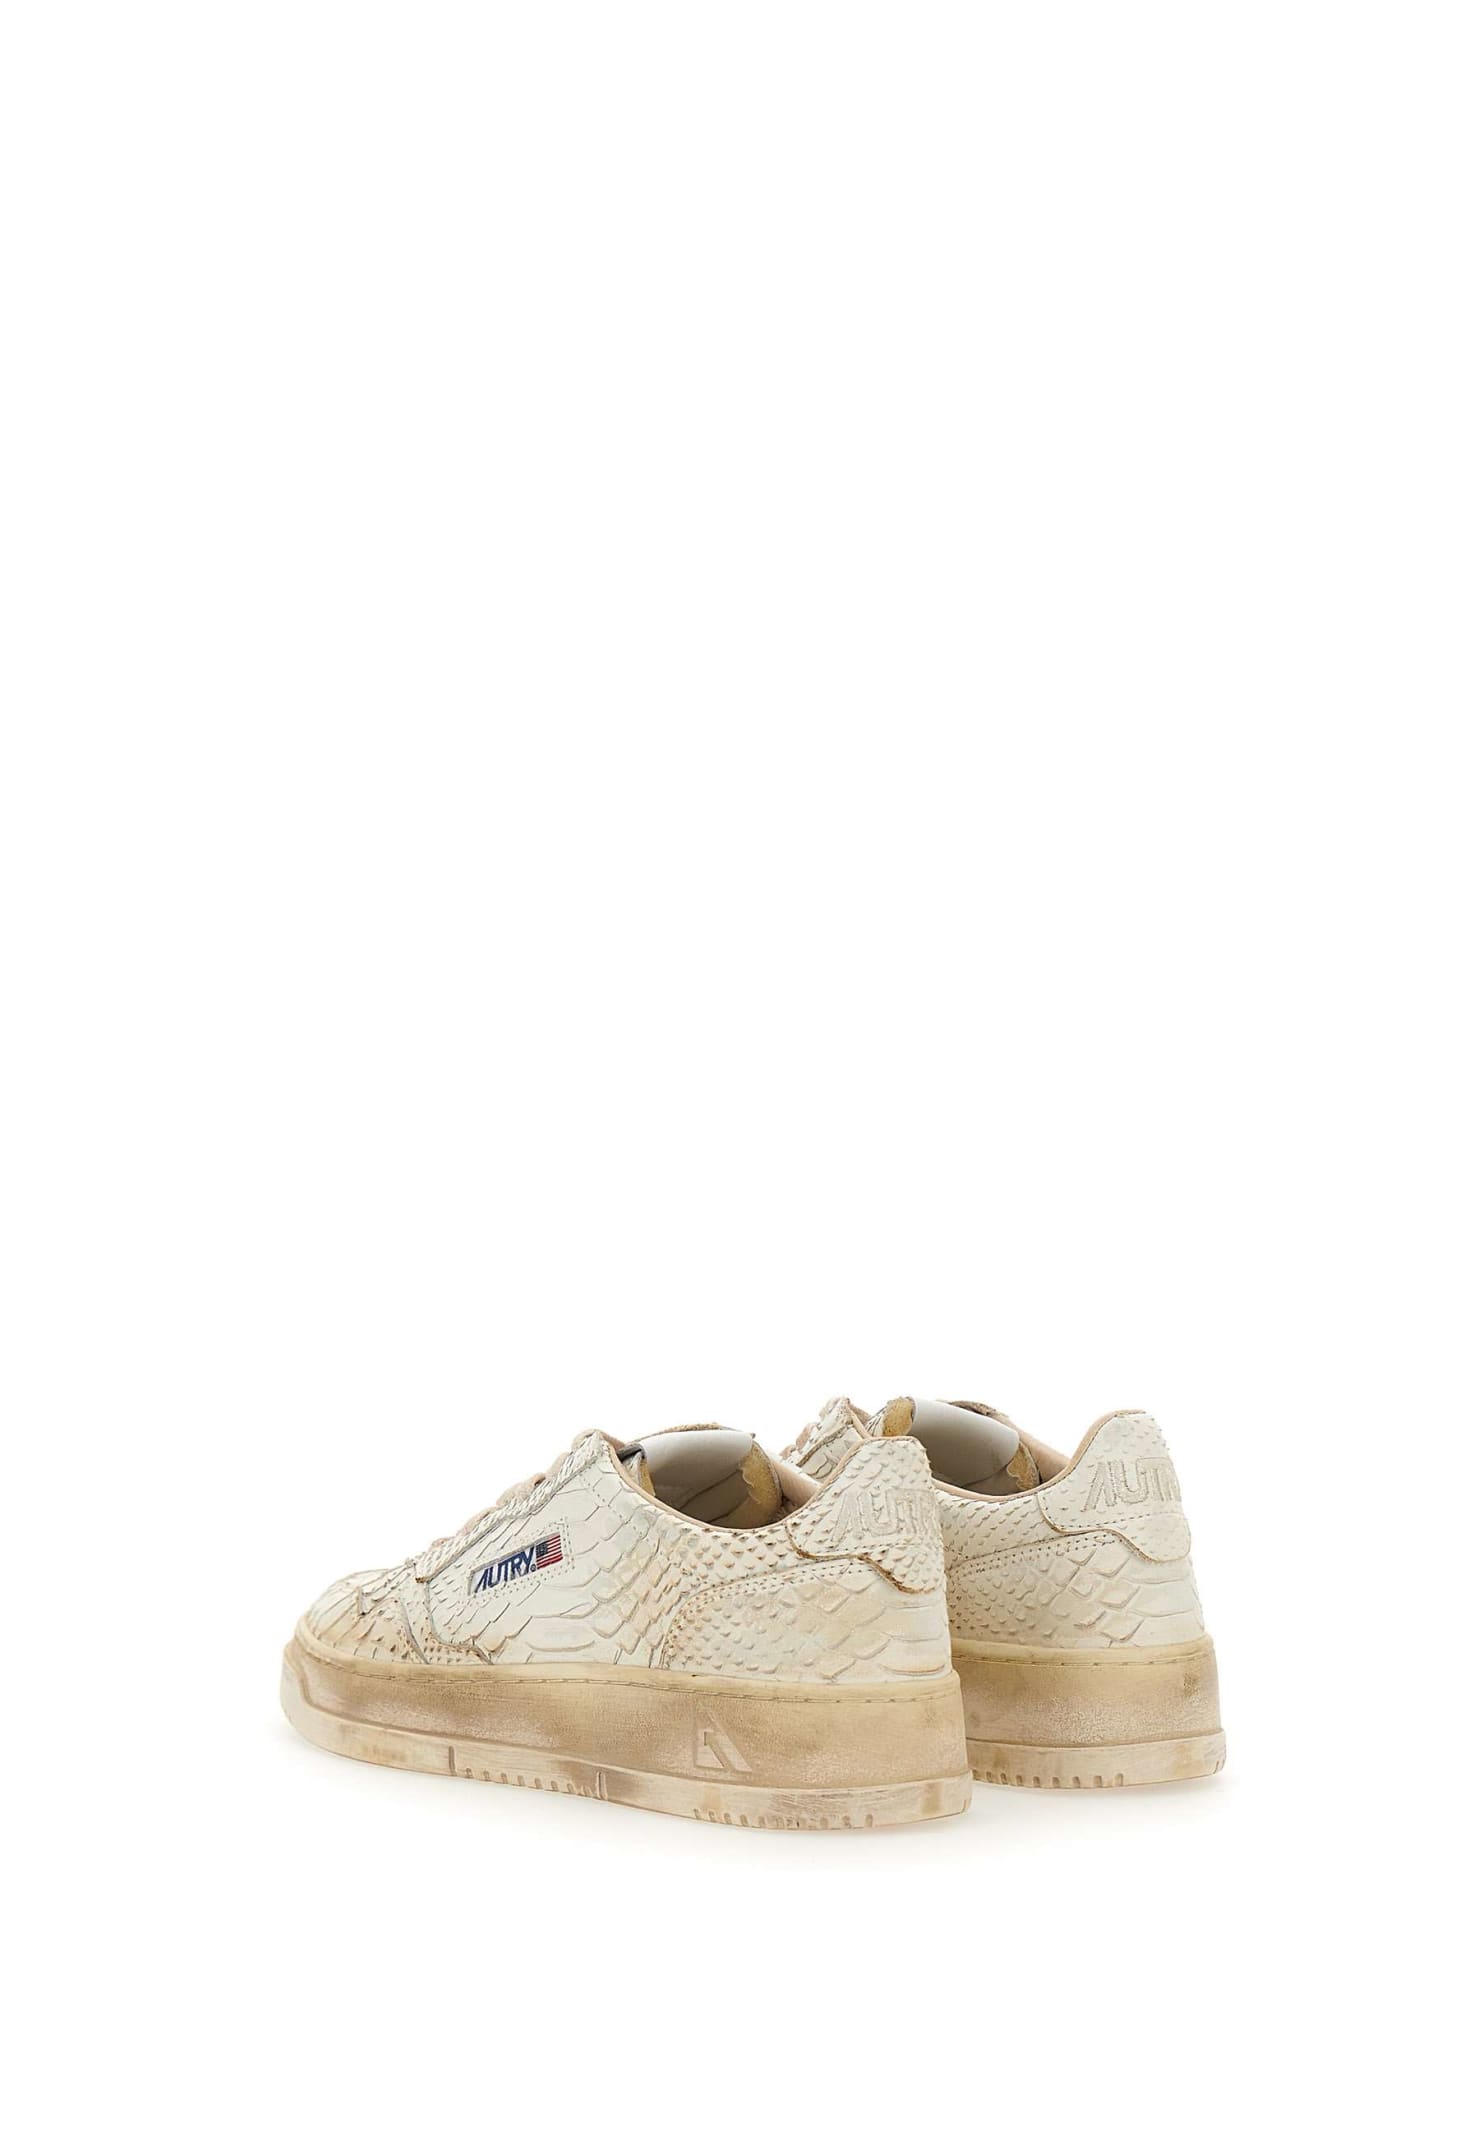 Shop Autry Avlw Pc06 Sneakers In White